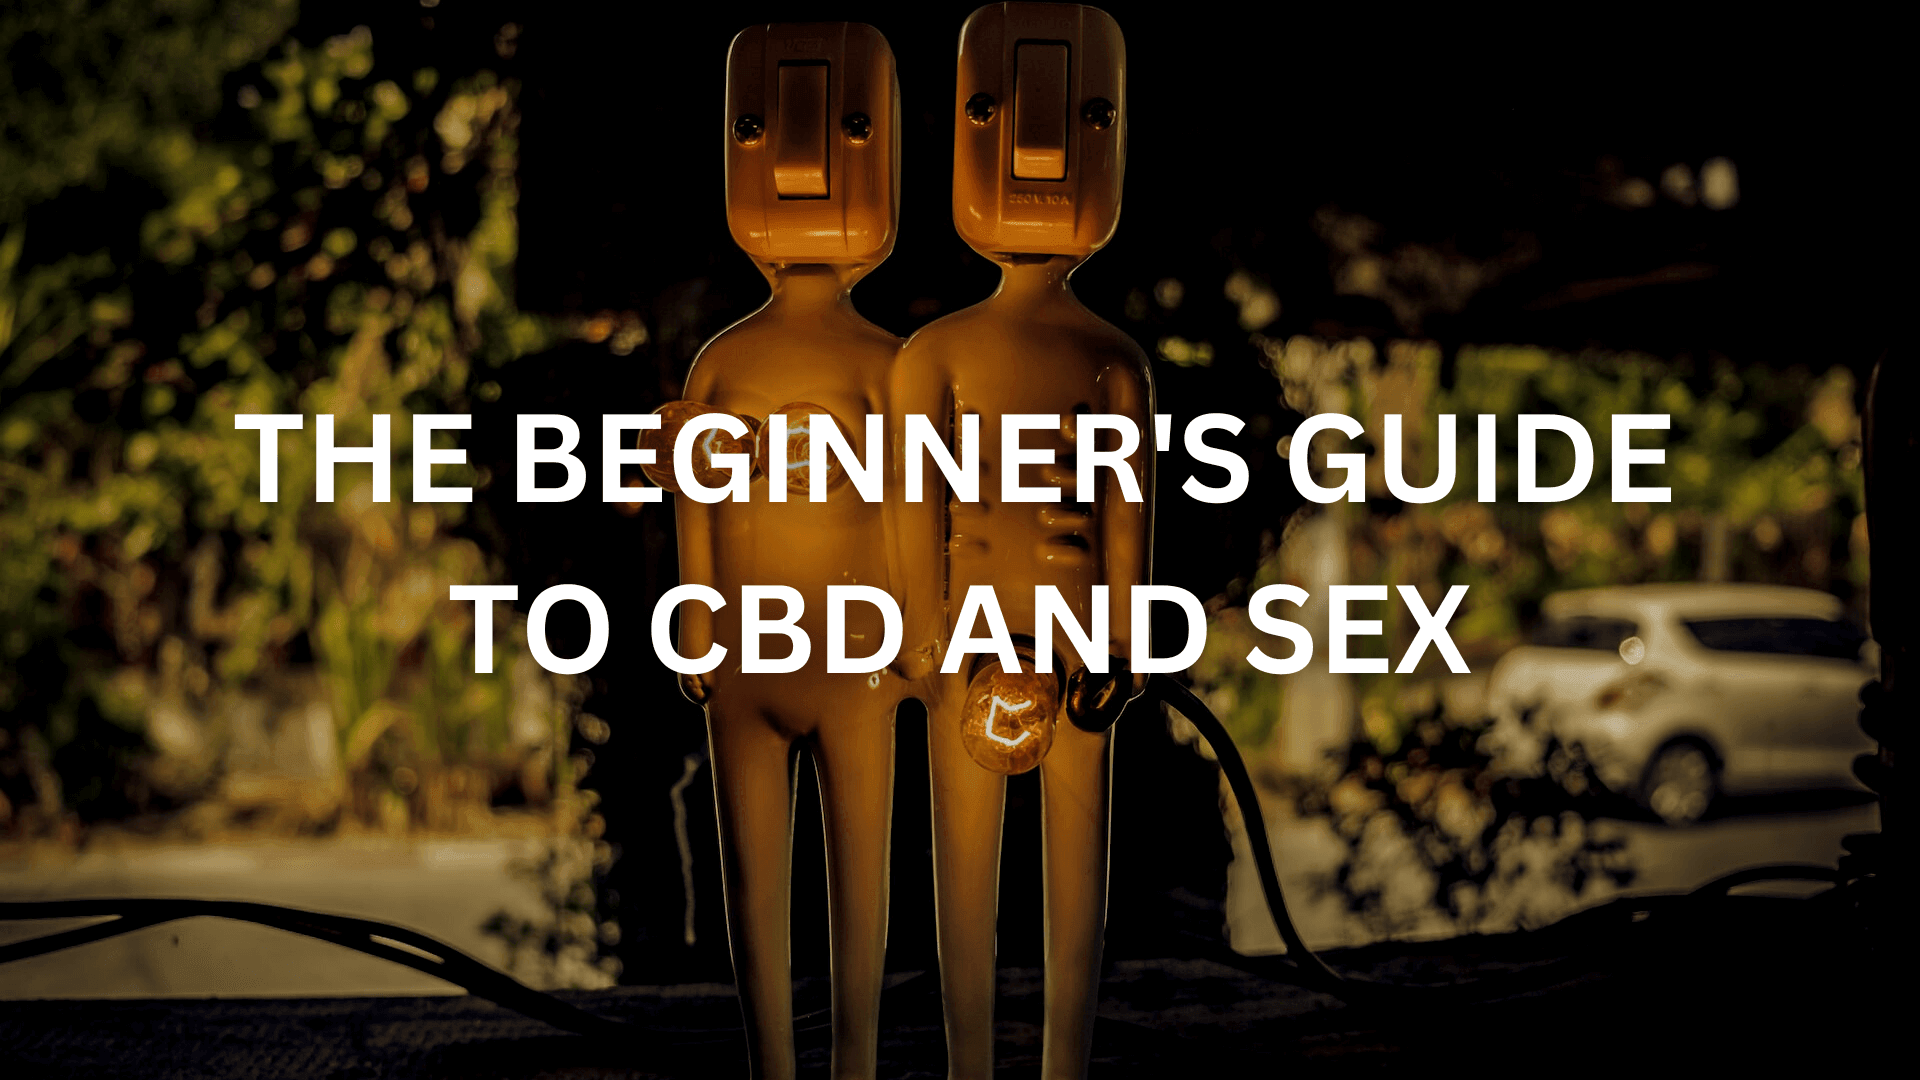 The Beginner's Guide to CBD and Sex